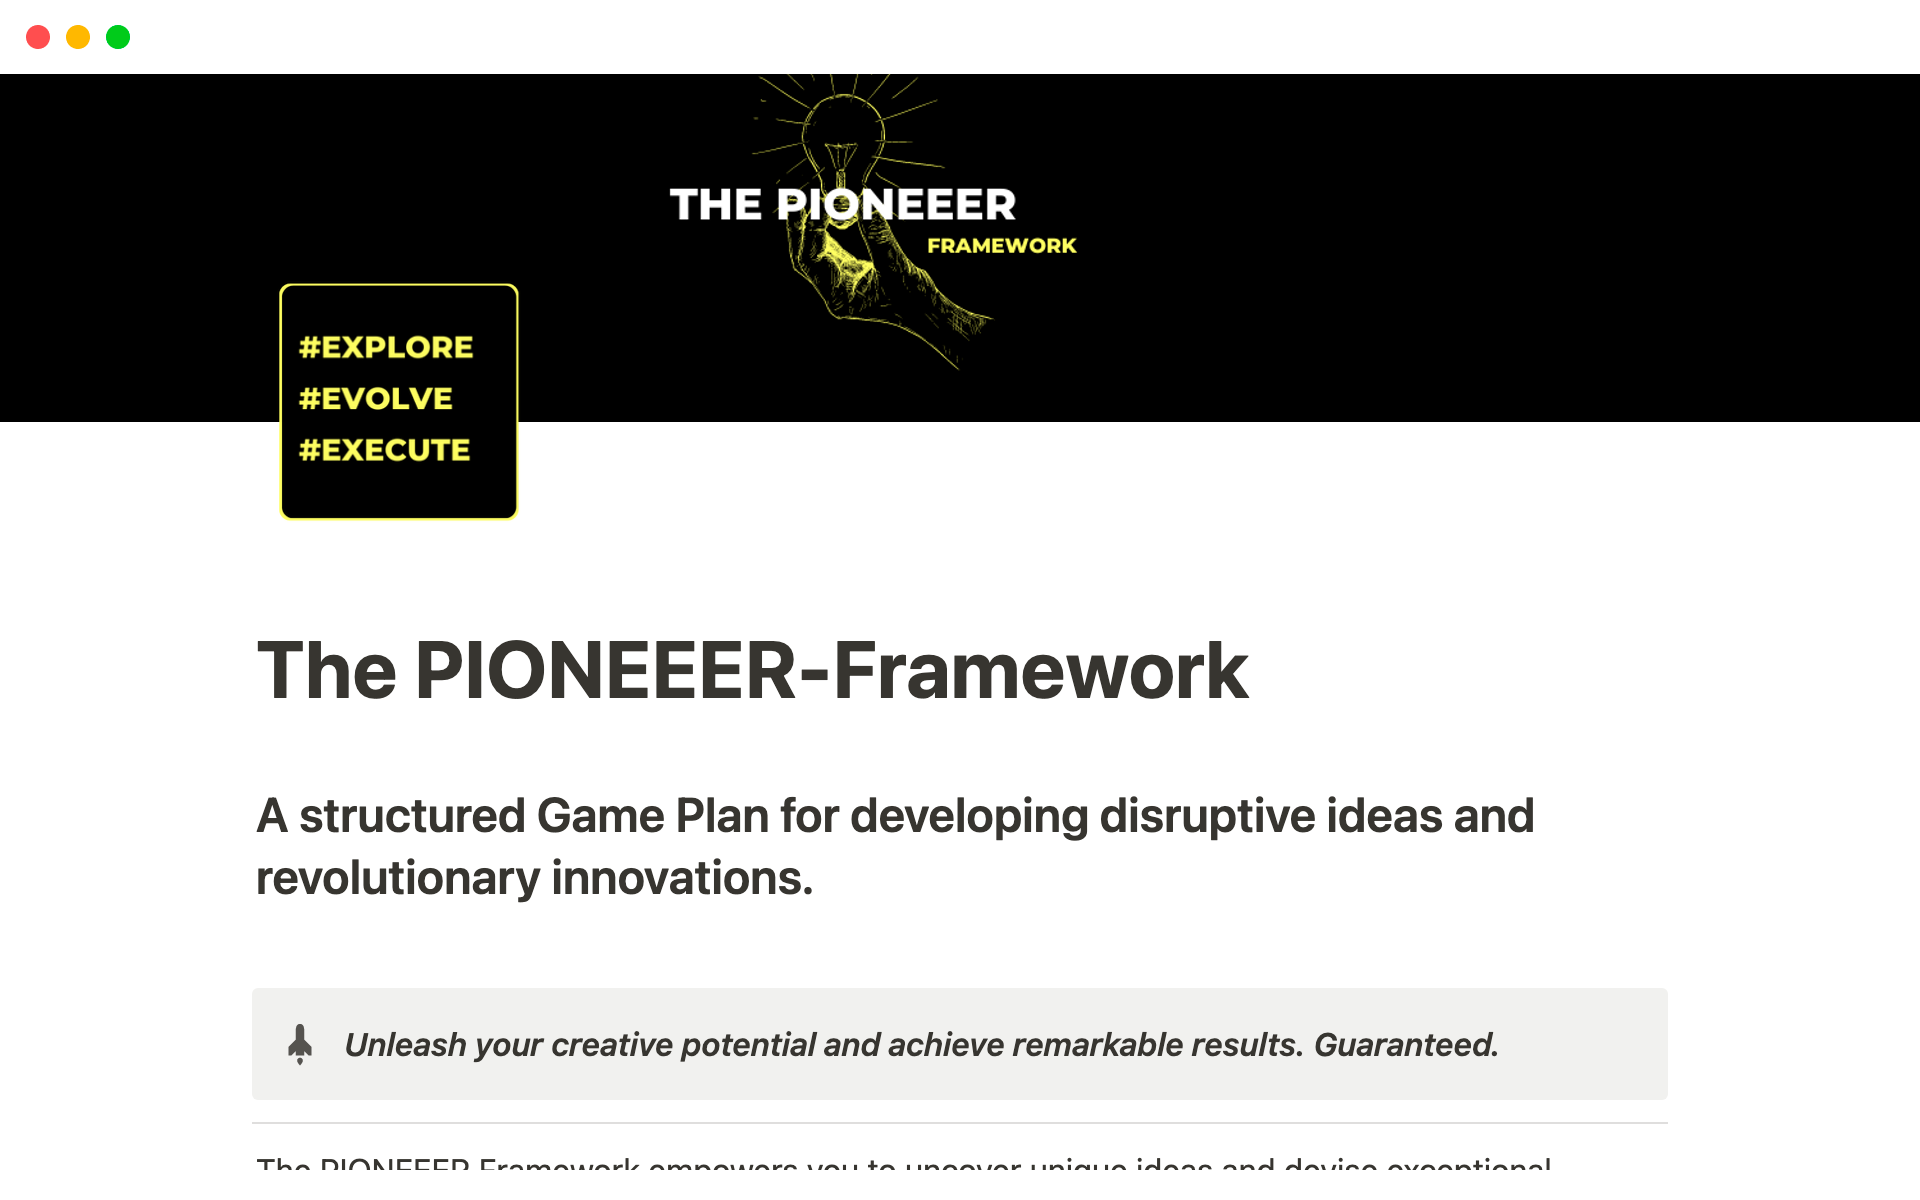 The PIONEEER Framework empowers you to uncover unique ideas and devise exceptional products customized to your or your personal or organization's needs.